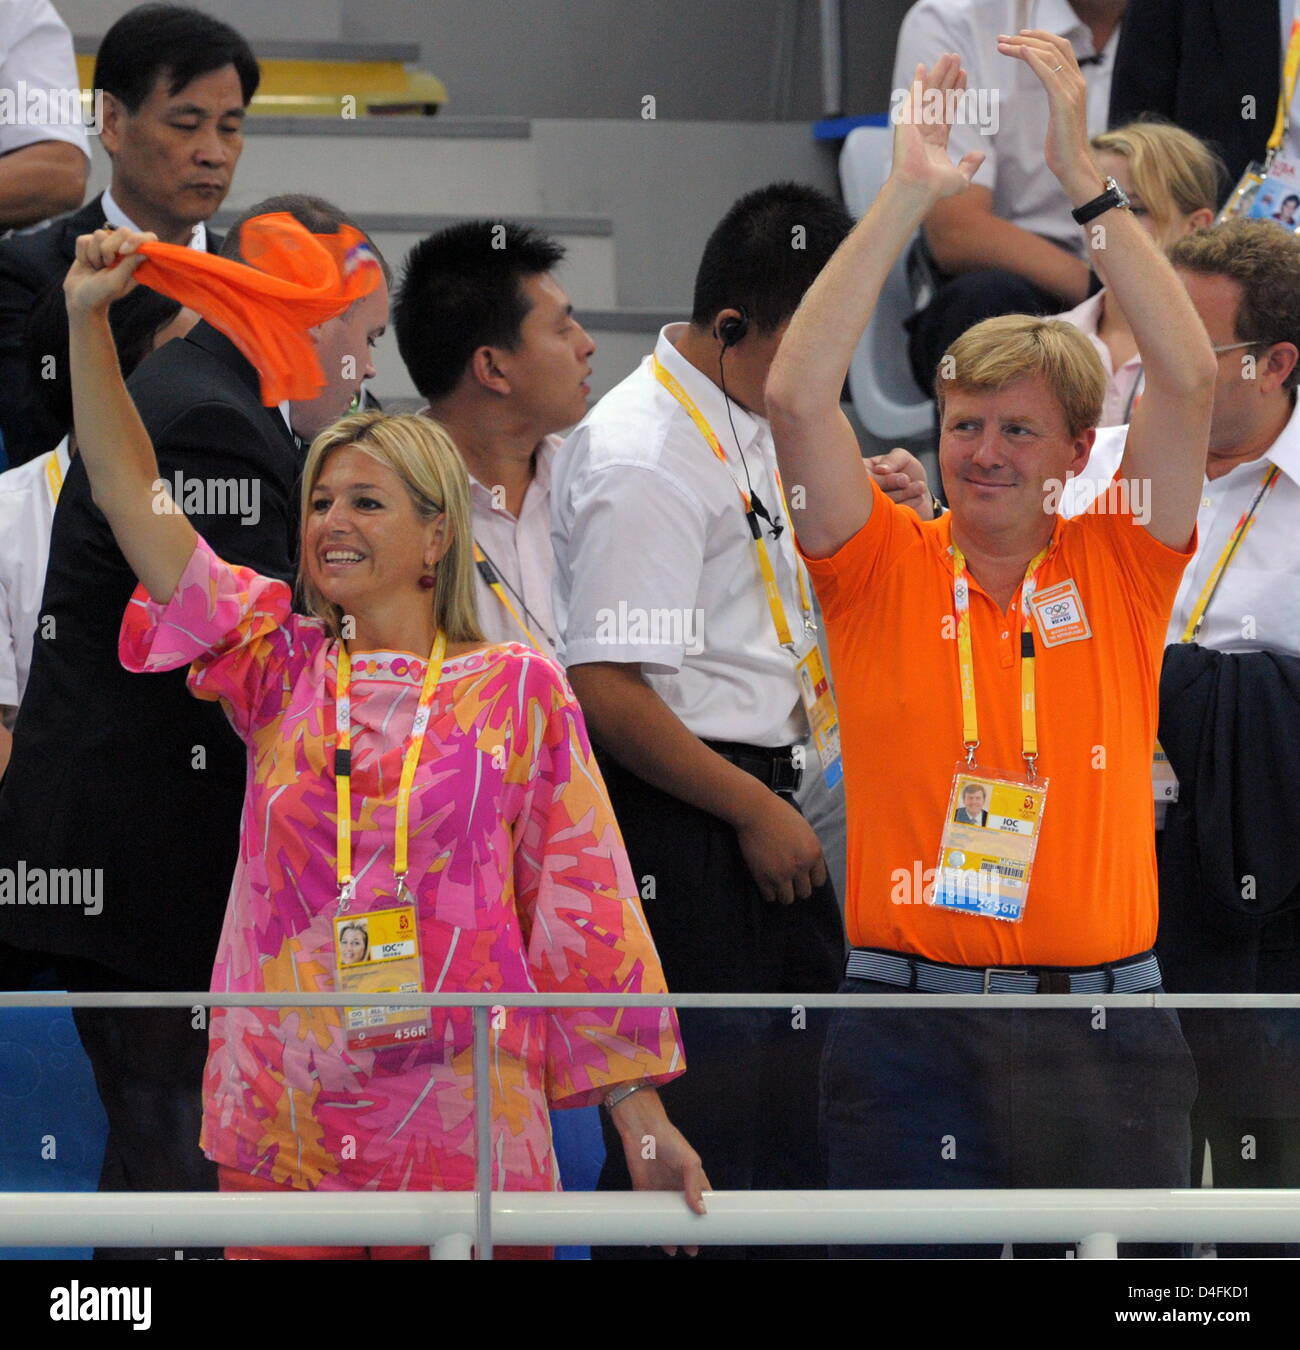 Prince Willem-Alexander and Princess Maxima of the Netherlands celebrate after the Netherlands women's 4x100 freestyle relay team won the gold medal with a time of 3:33.76 during the 2008 Olympics at the National Aquatics Center in Beijing, China 10 August 2008. Photo: Bernd Thissen dpa (c) dpa - Bildfunk Stock Photo